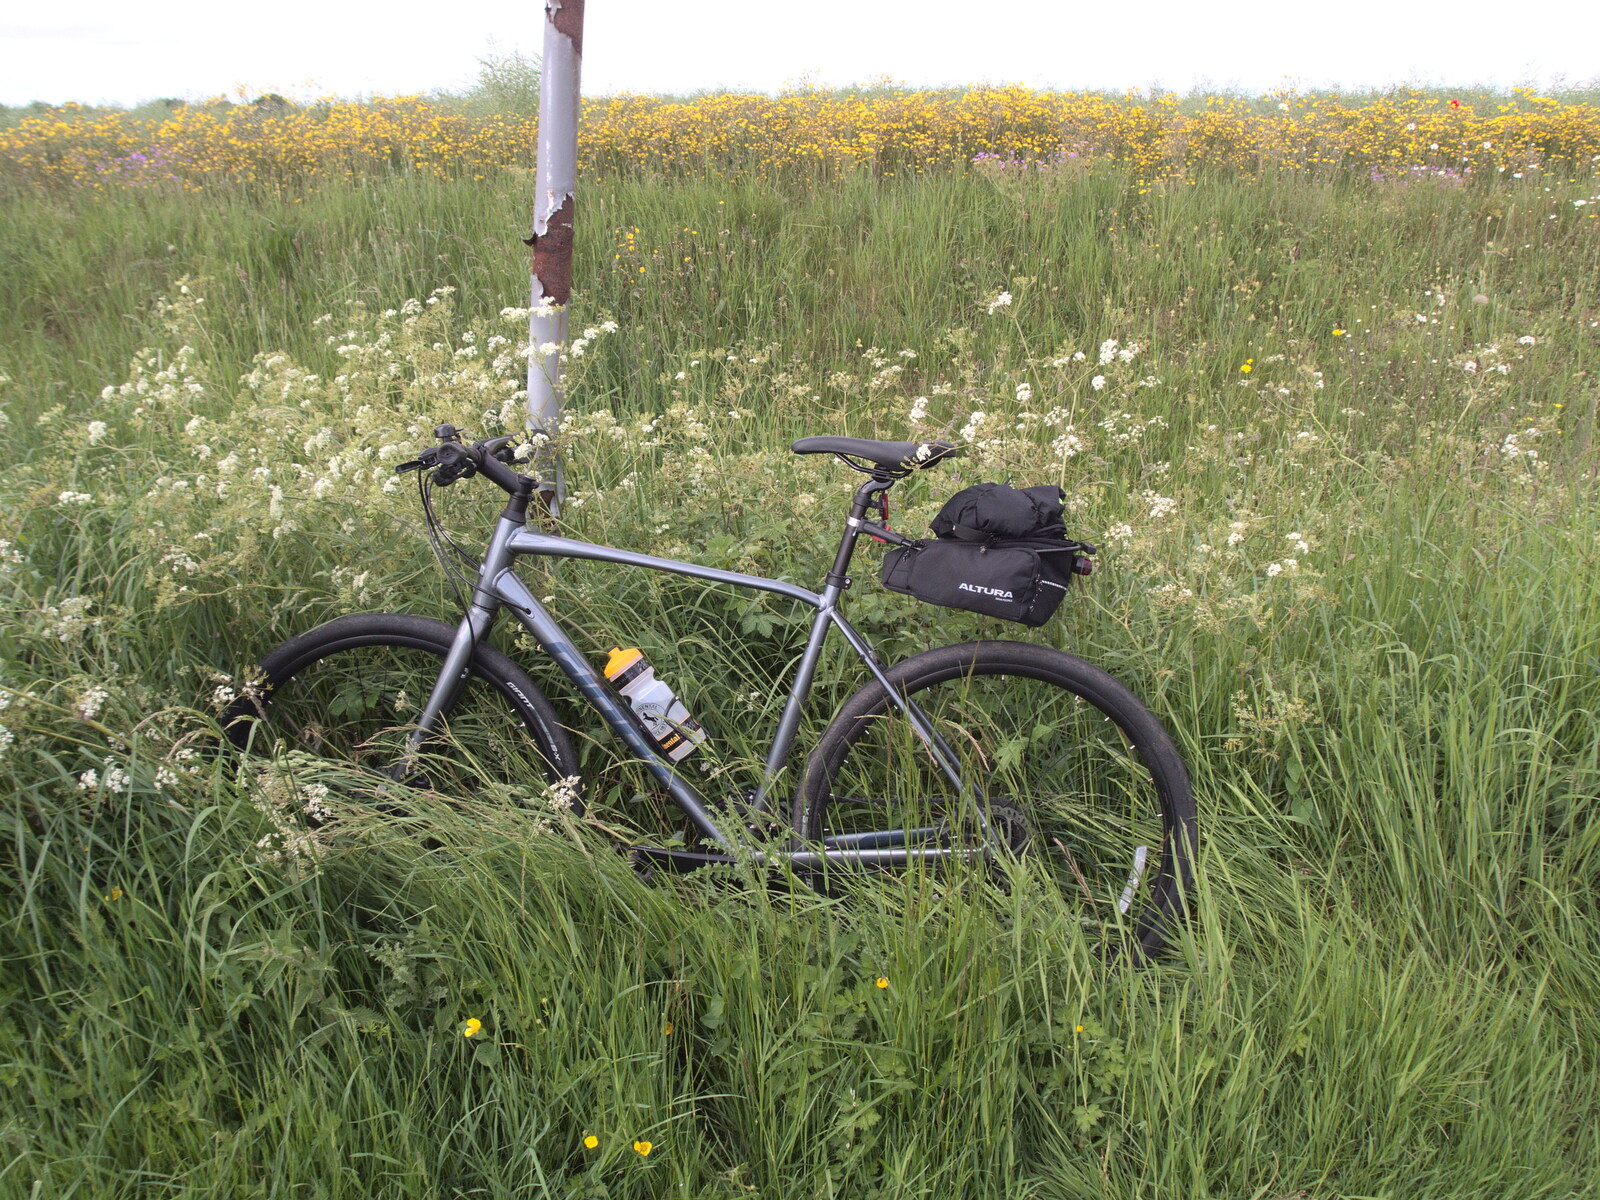 Nosher's bike leans on a post from The Jubilee Torch Run, Brome and Oakley, Suffolk - 25th May 2022